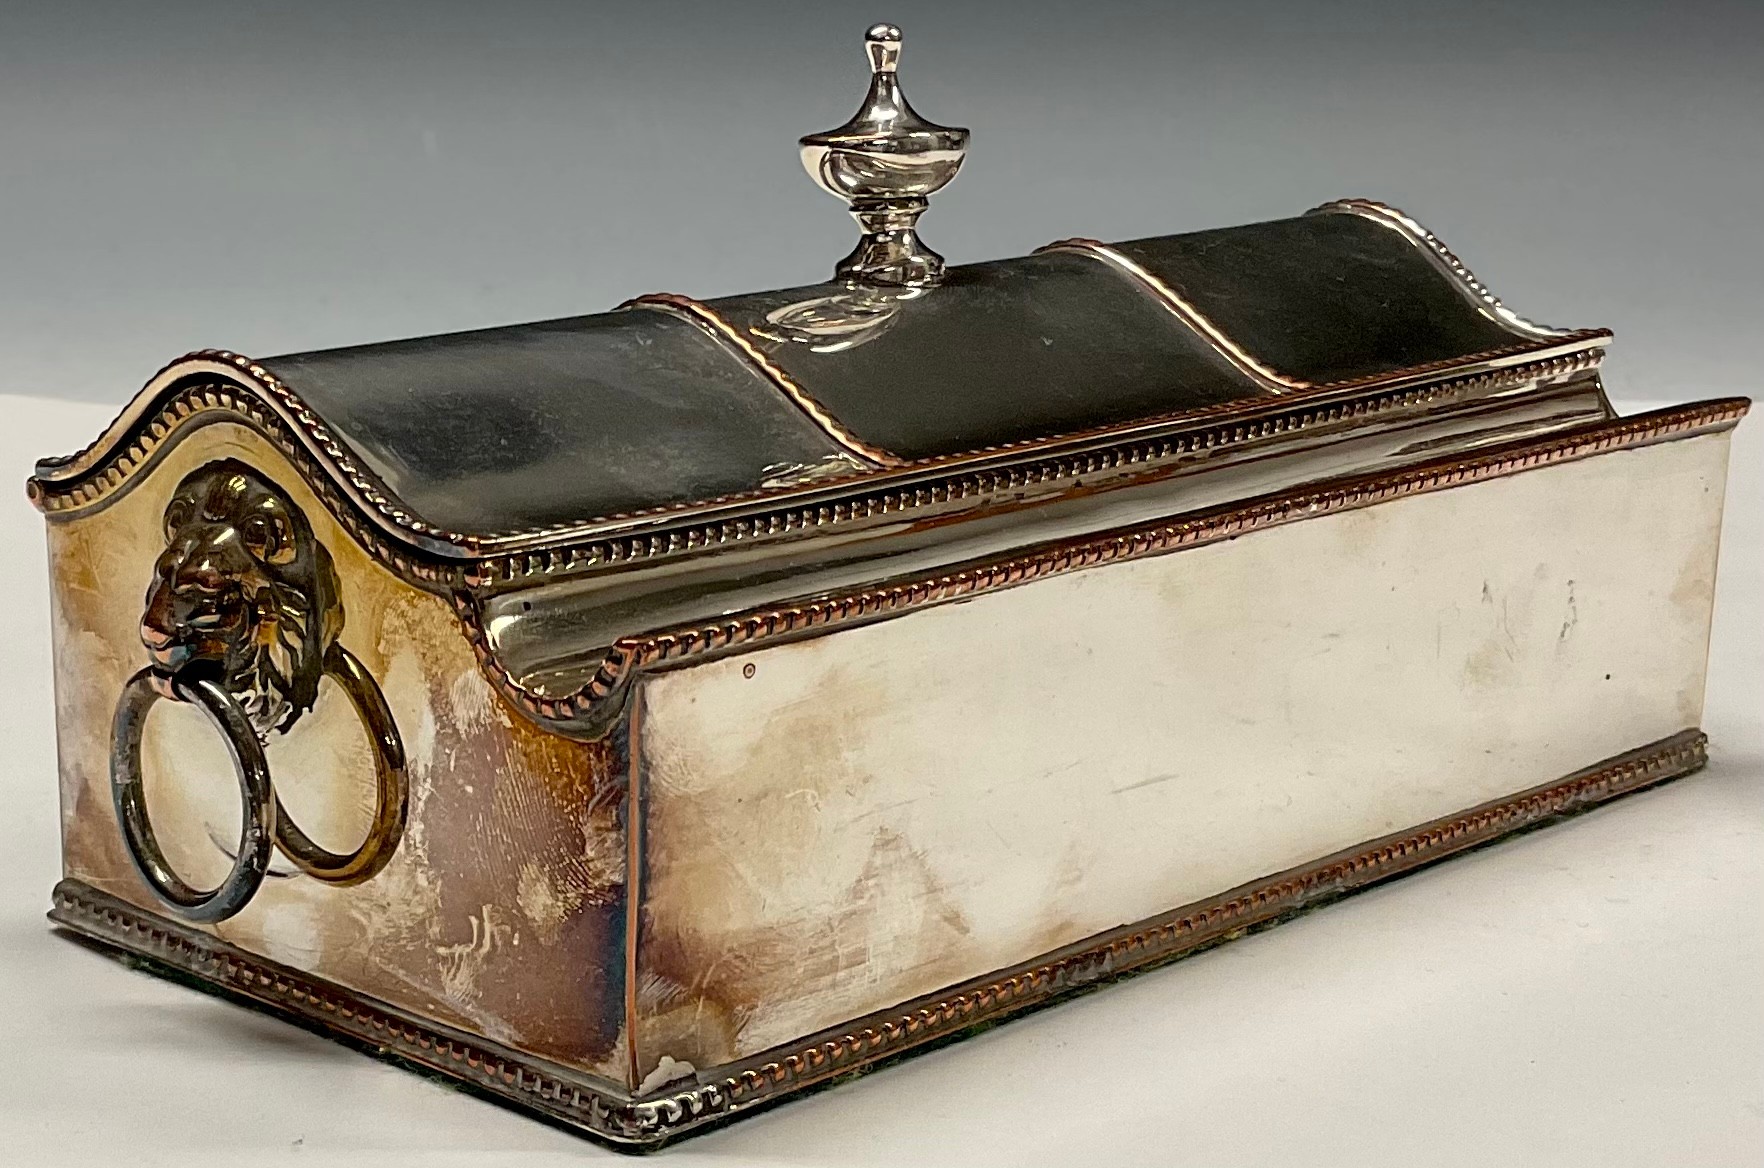 A George III Old Sheffield Plate treasury inkstand, hinged serpentine cover with urnular finial, - Image 6 of 7